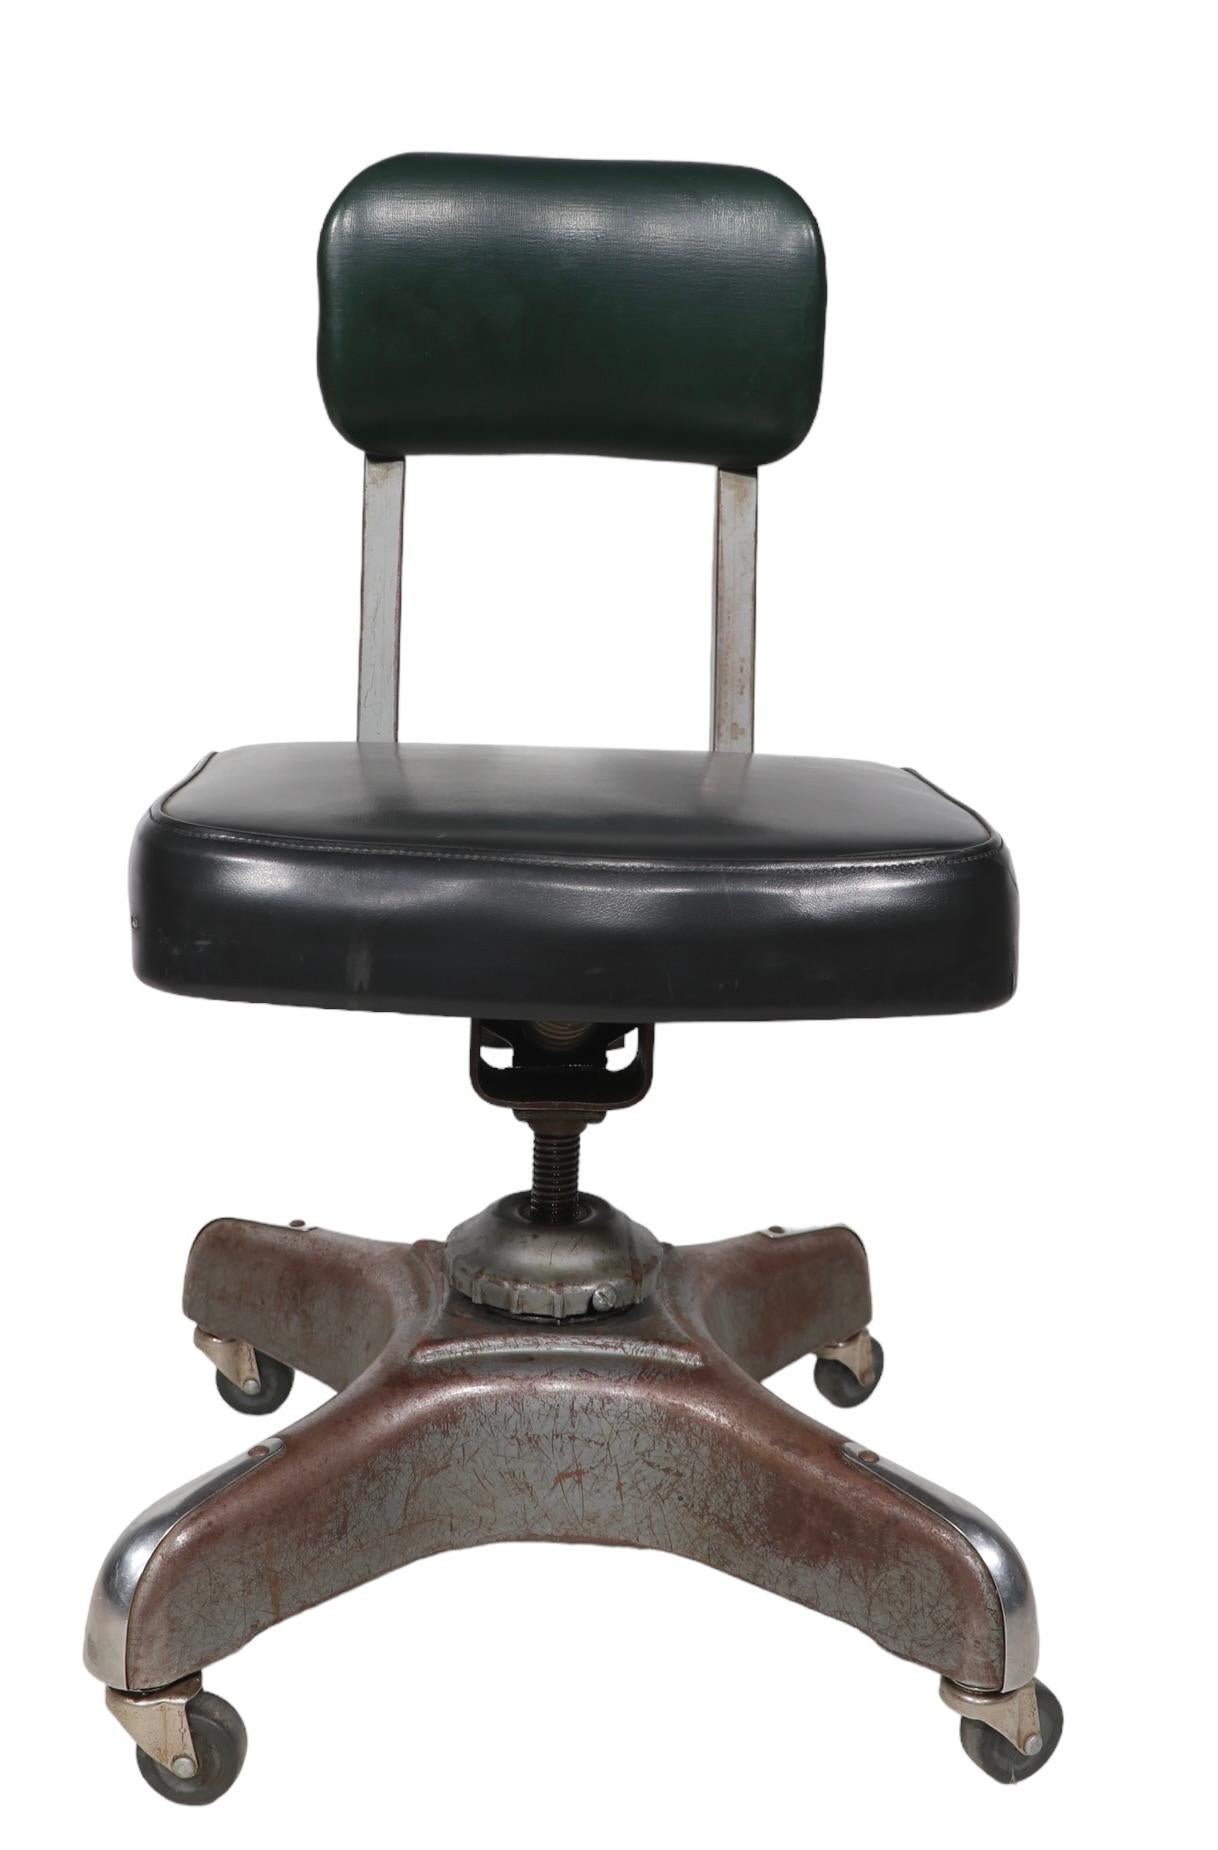 Art Deco Industrial Swivel Tilt Armless Desk Chair by Harter Corporation 1930/40 In Good Condition For Sale In New York, NY